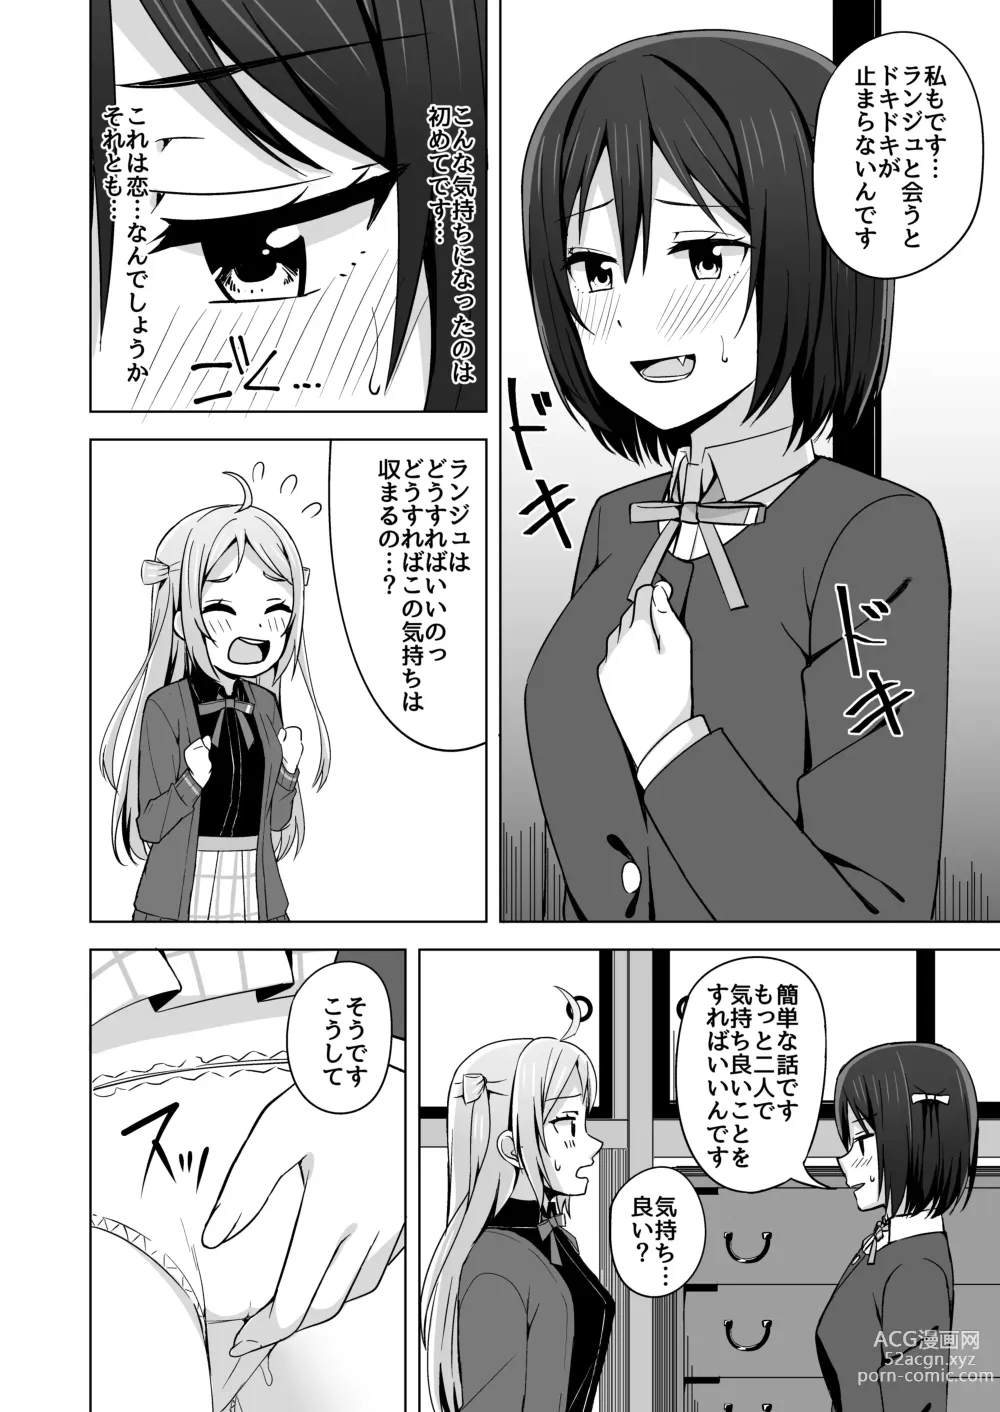 Page 16 of doujinshi Go for dream